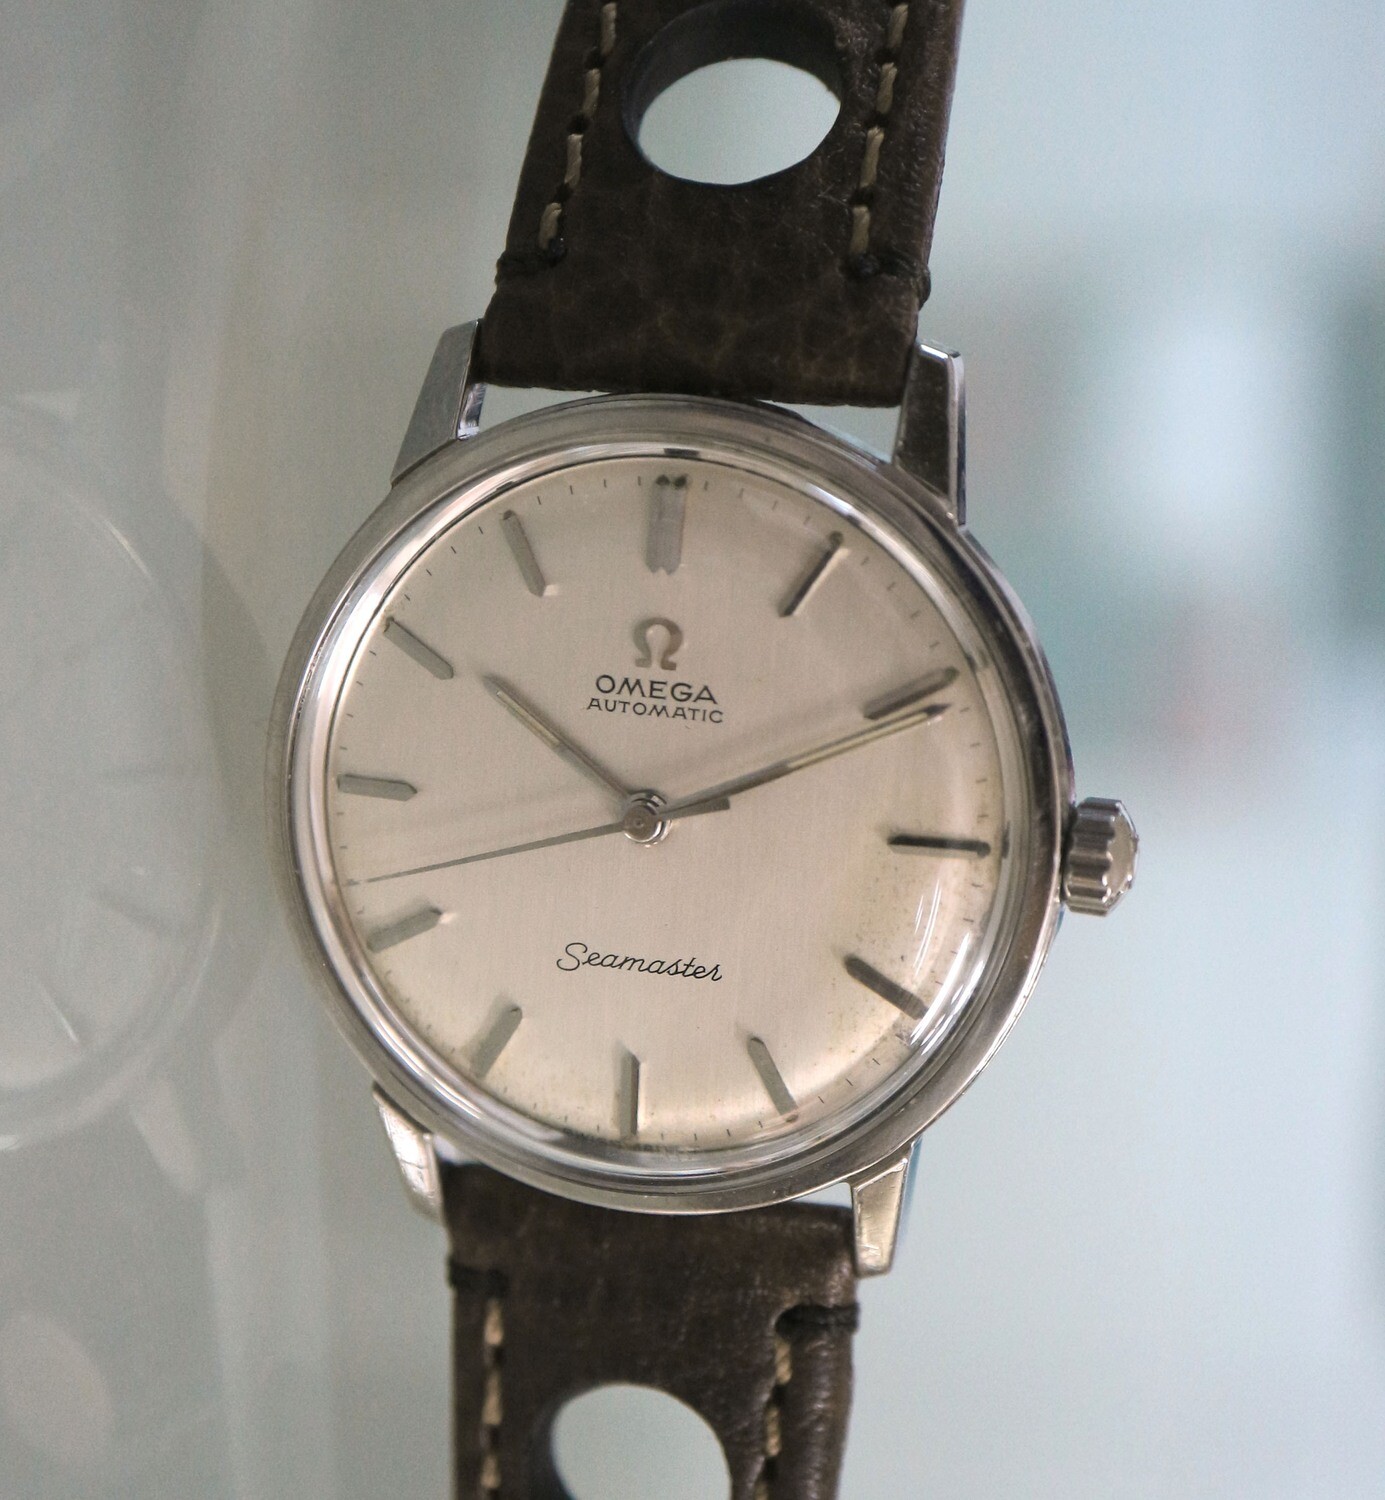 Omega Seamaster Automatic in Stahl, ca. 1965